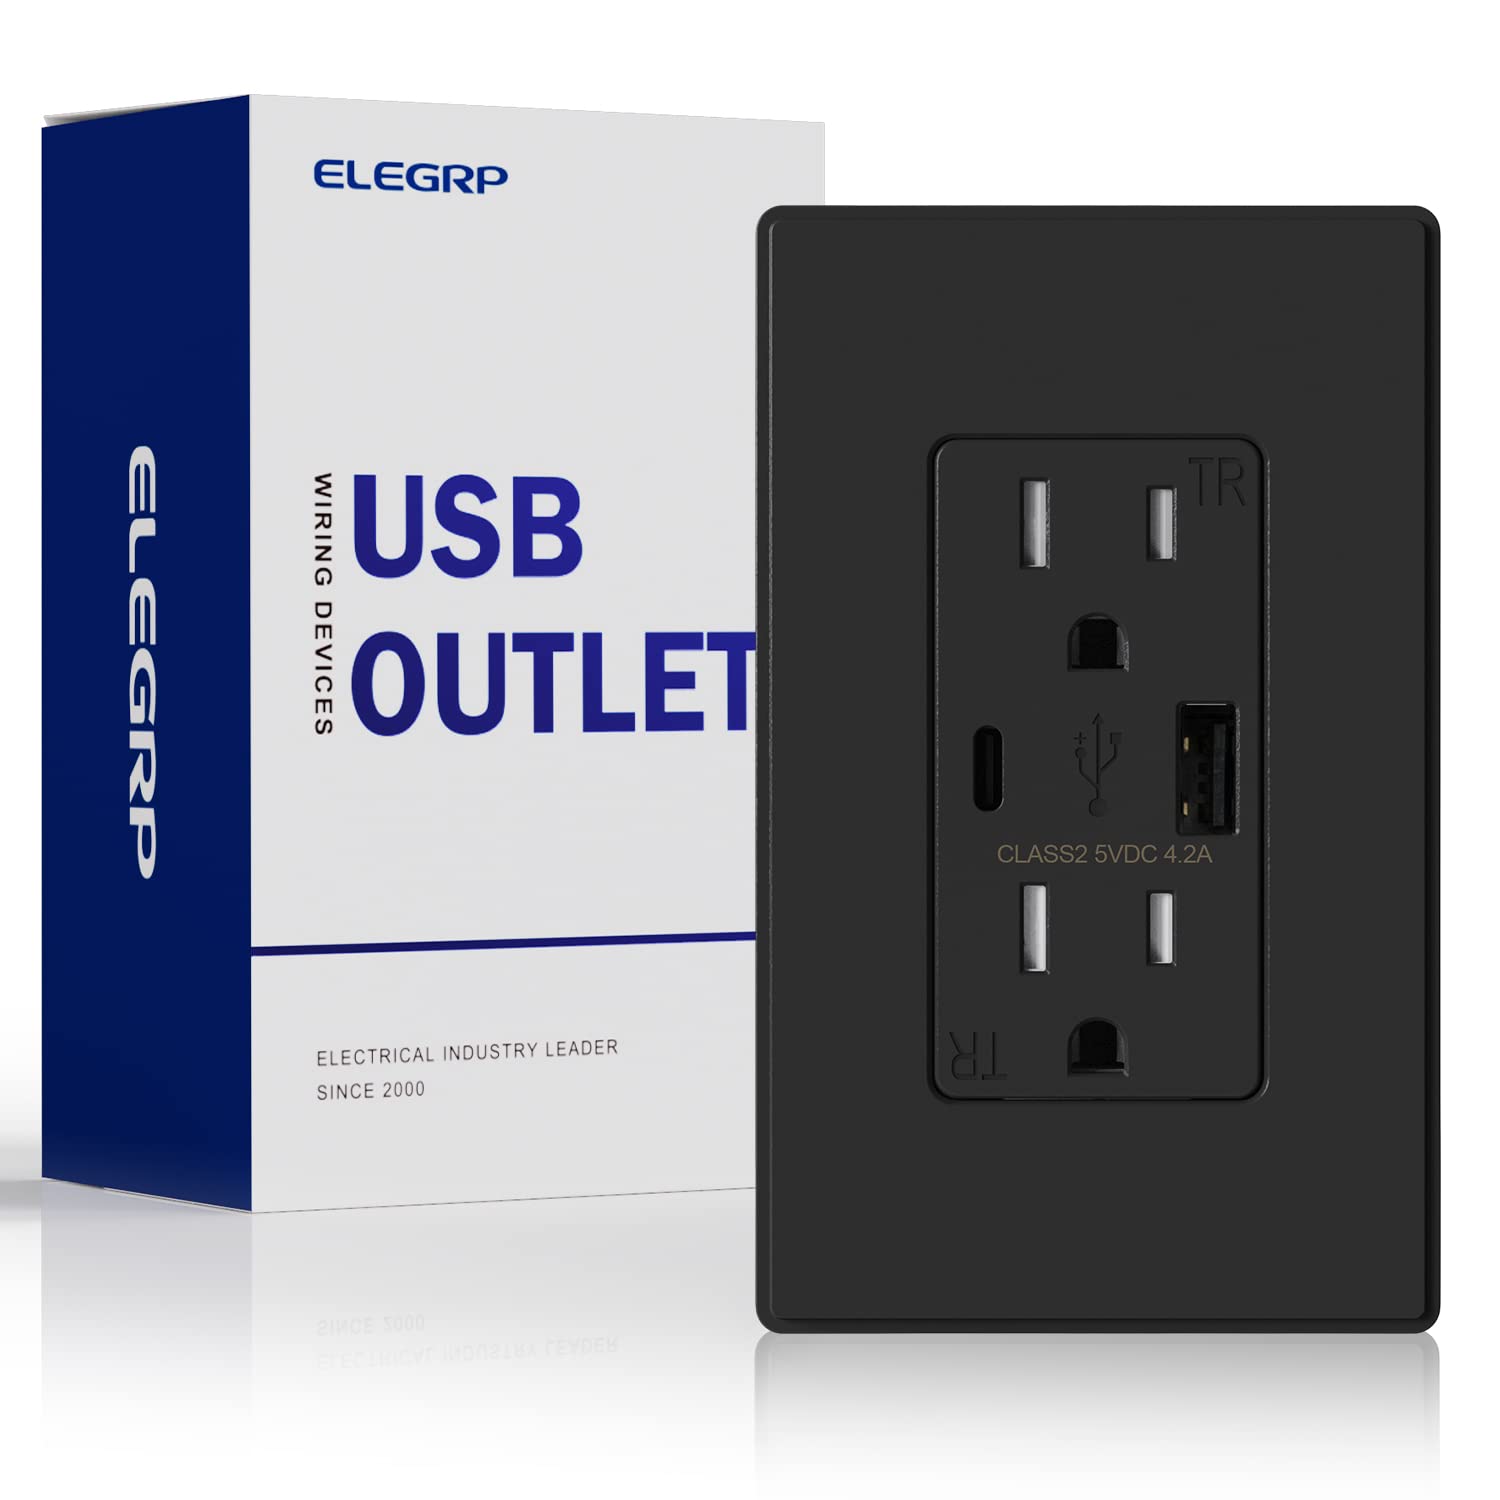 ELEGRP USB Outlet, Type C USB Wall Charger Outlet,Tampe...